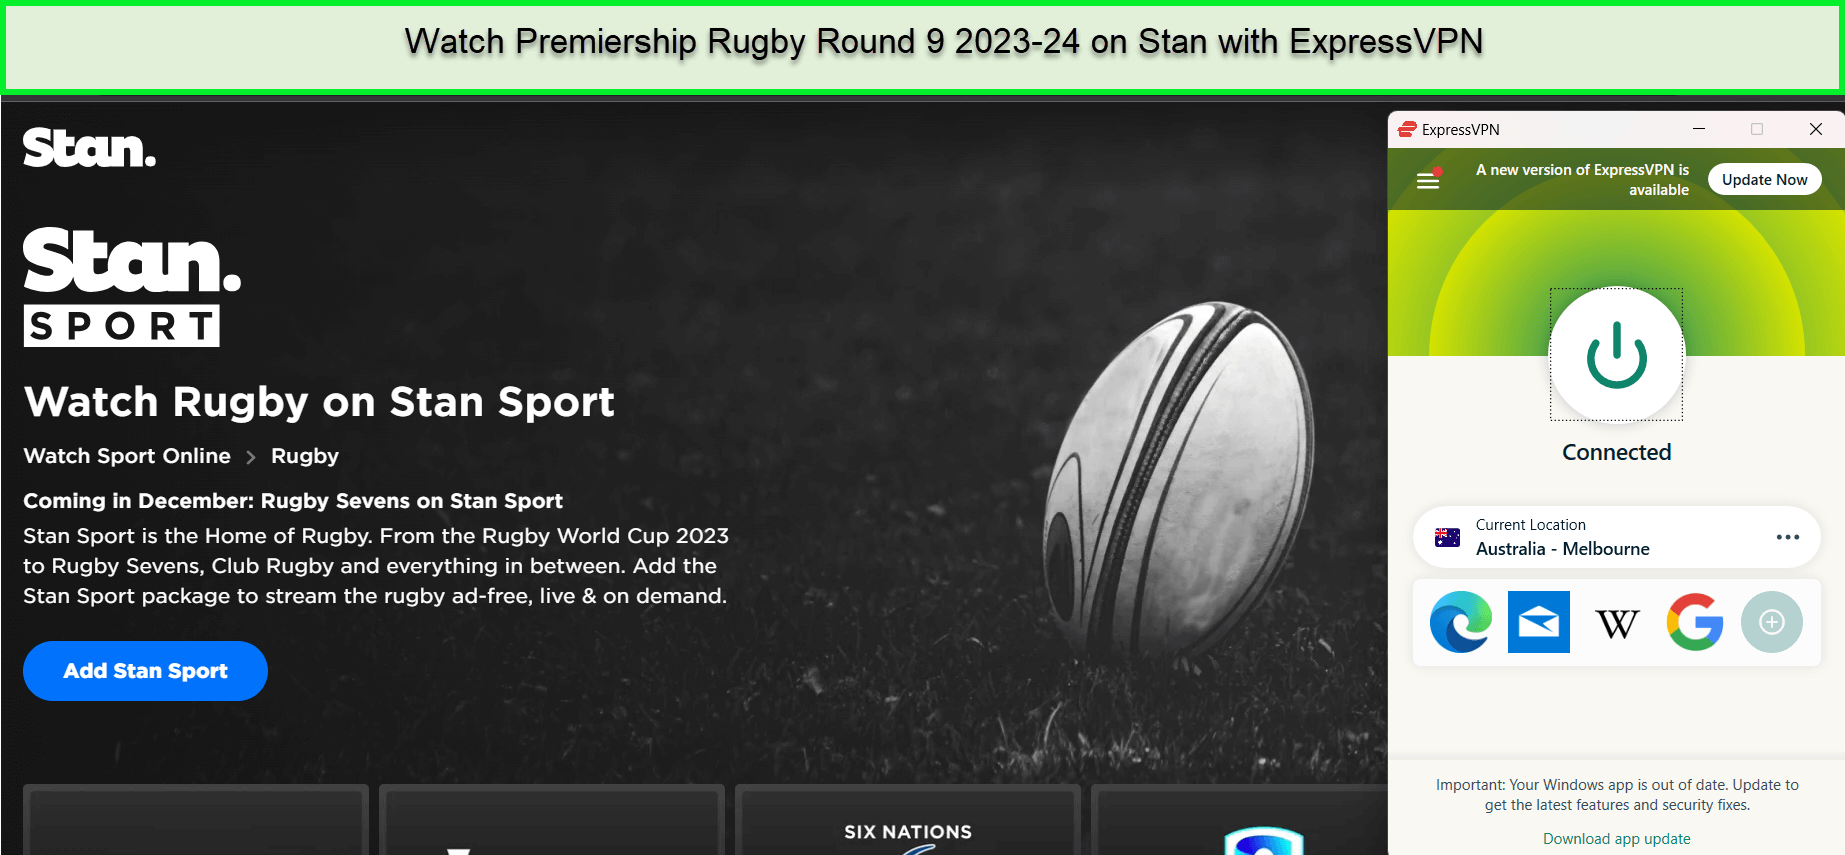 Watch-Premiership-Rugby-Round-9-2023-24-in-Singapore-on-Stan